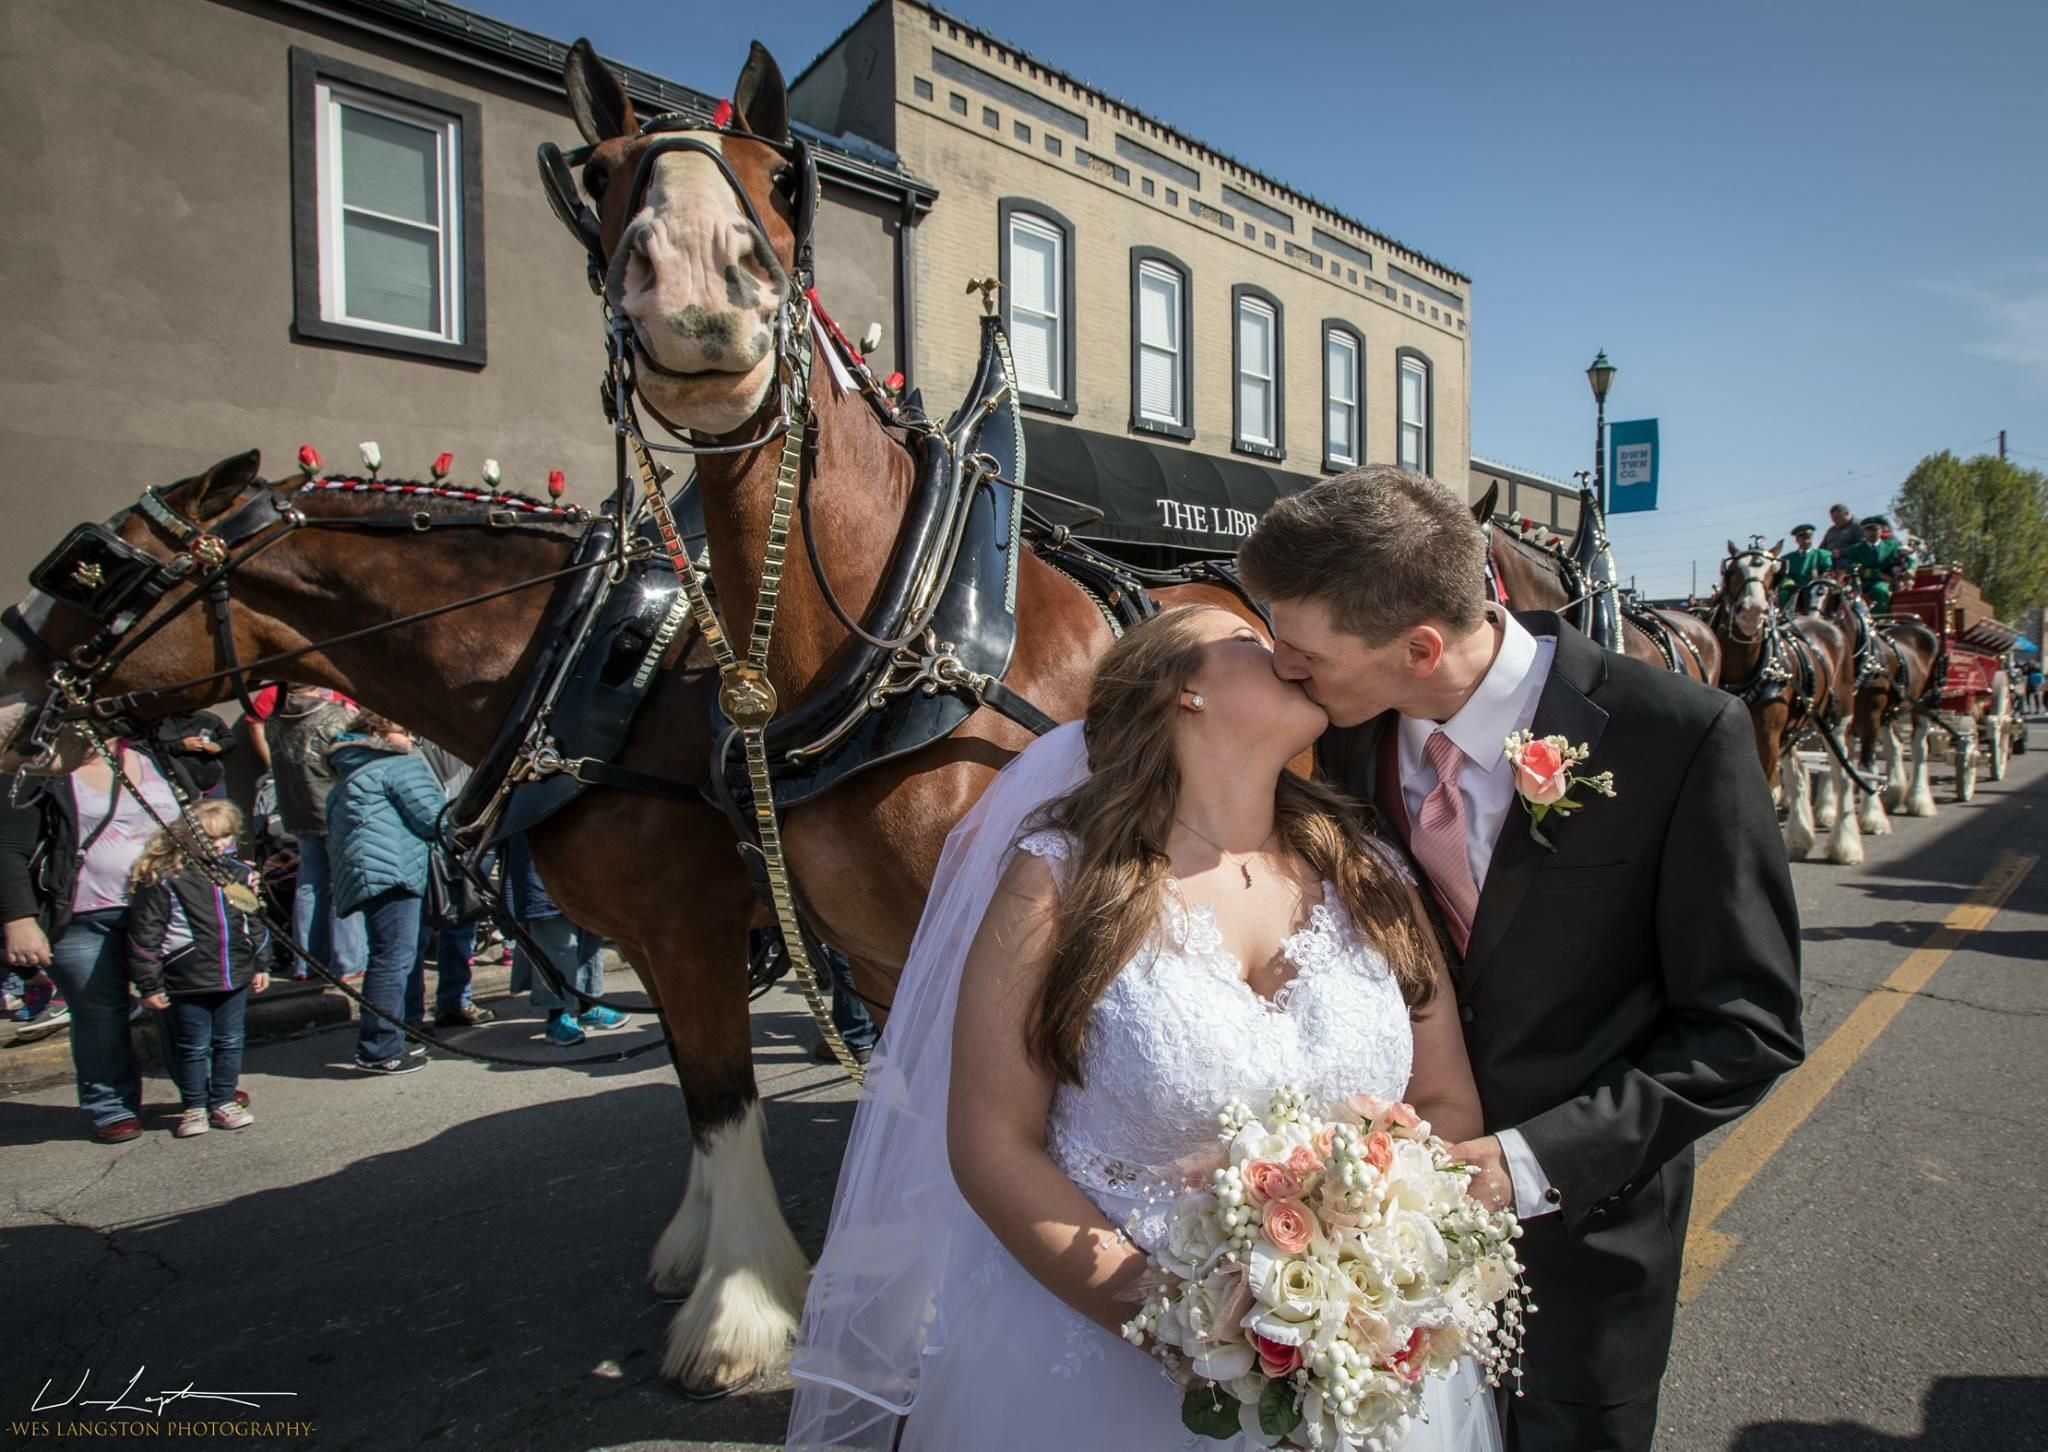 This Clydesdale was really into having his picture taken with the bride and groom.